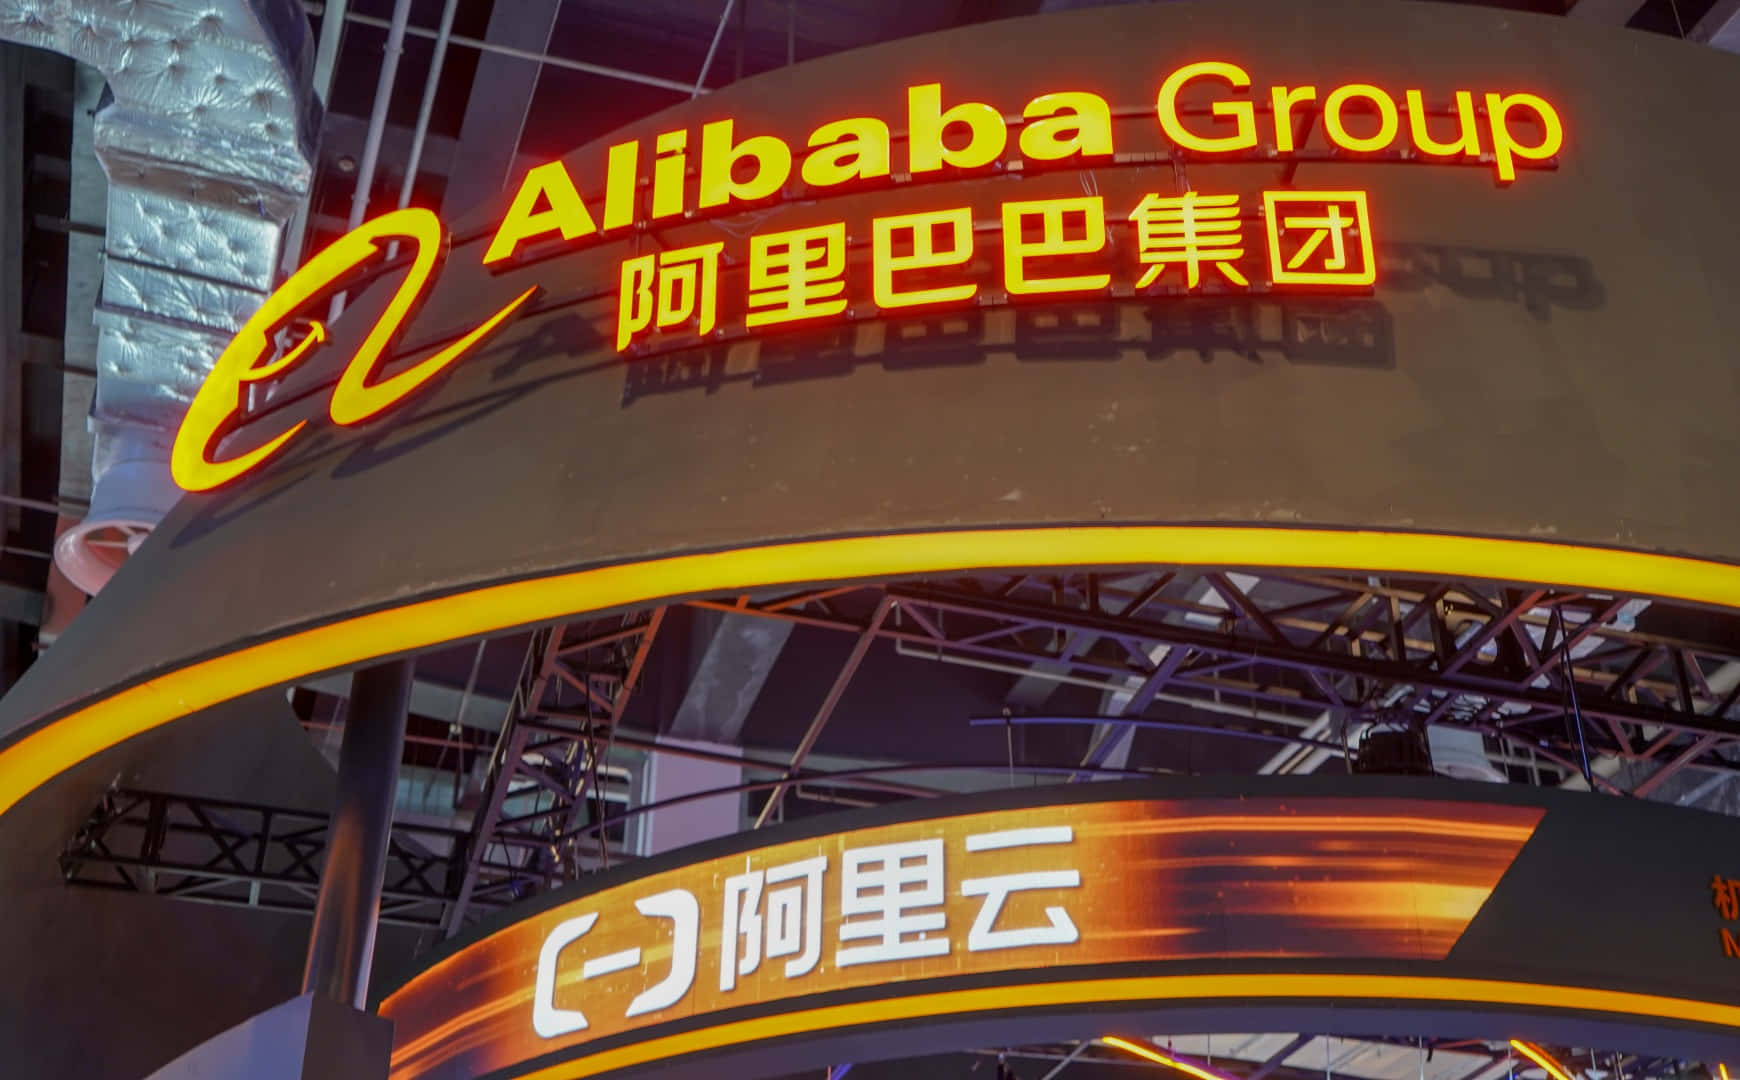 Innovation and Inclusion at Alibaba